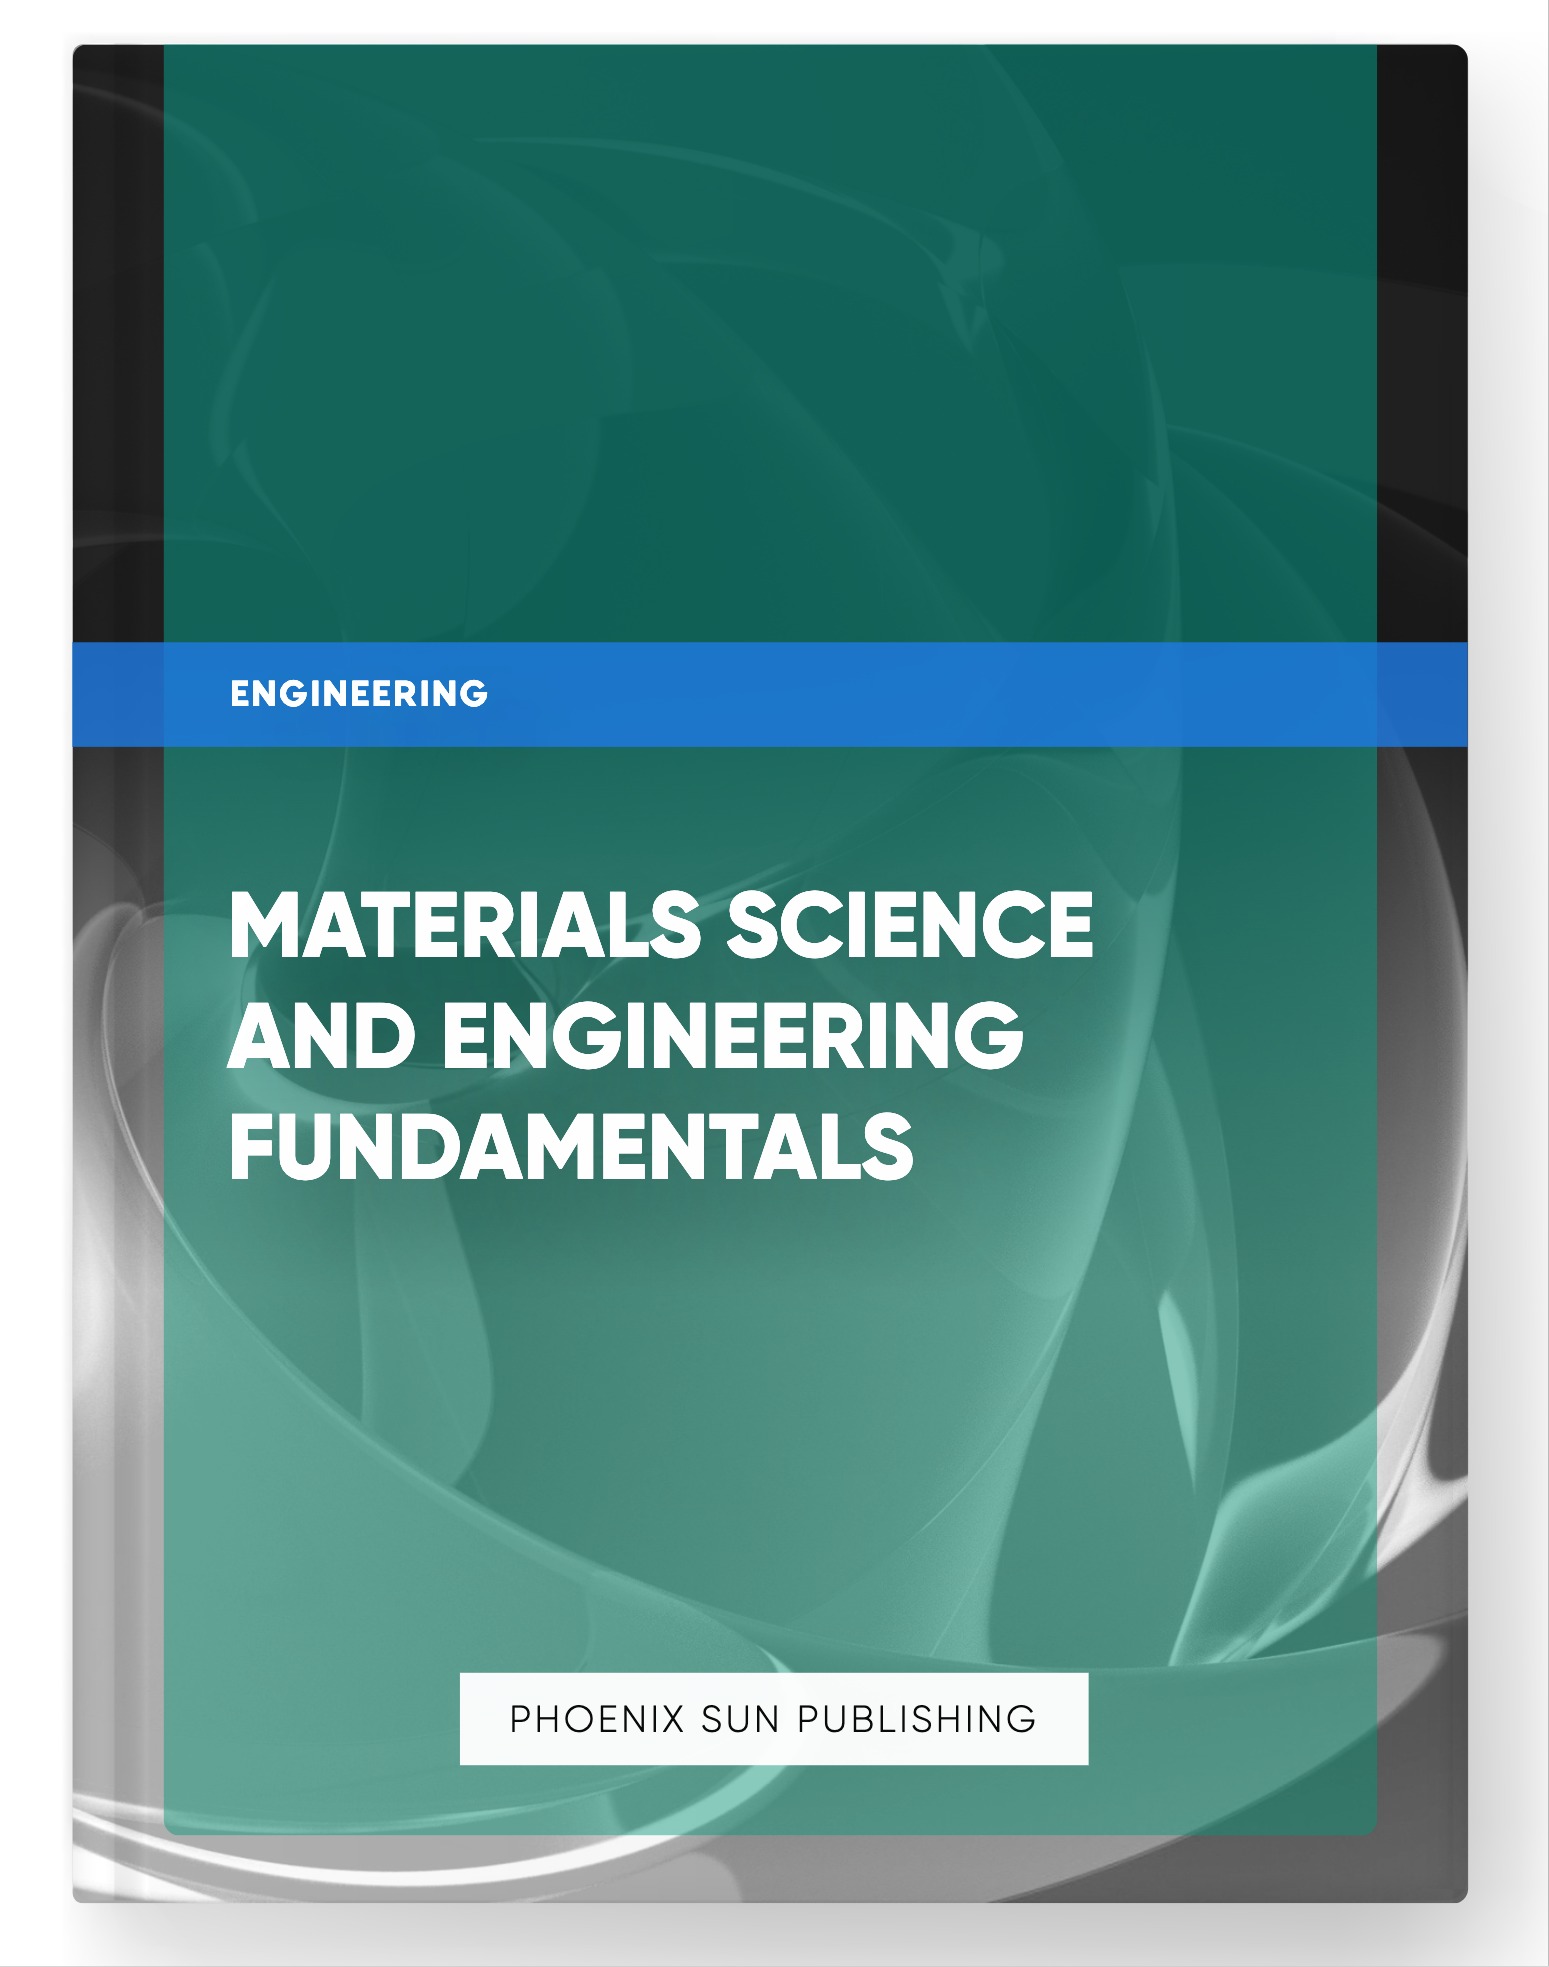 Materials Science and Engineering Fundamentals